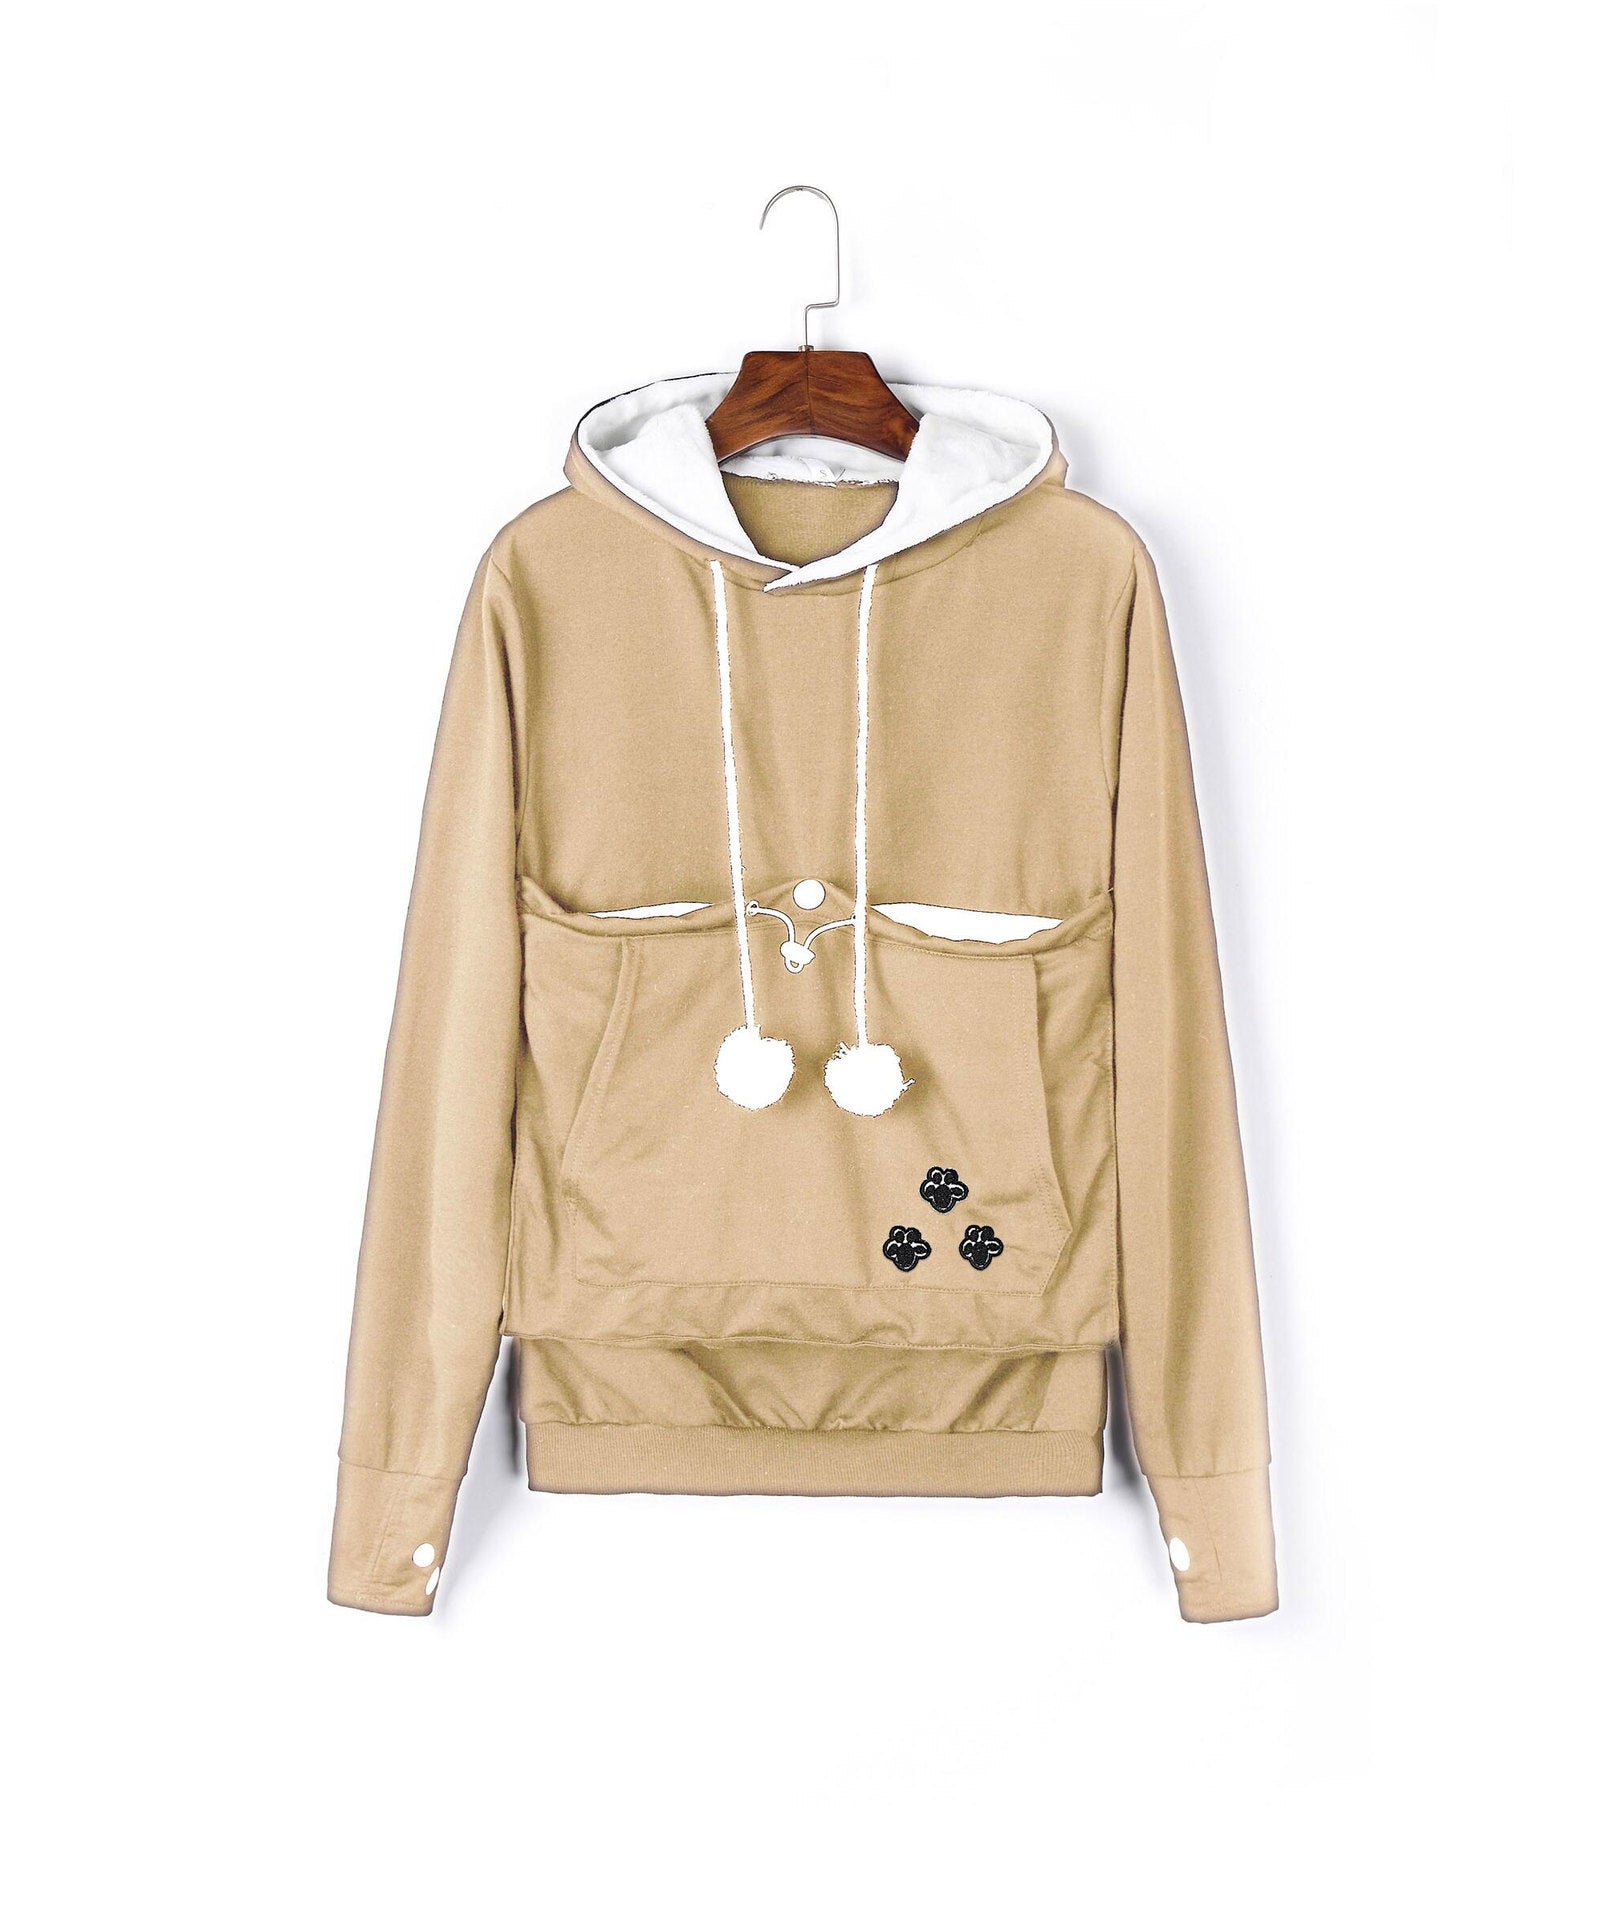 Charming Pullover Pet Large Pocket Hooded Sweater